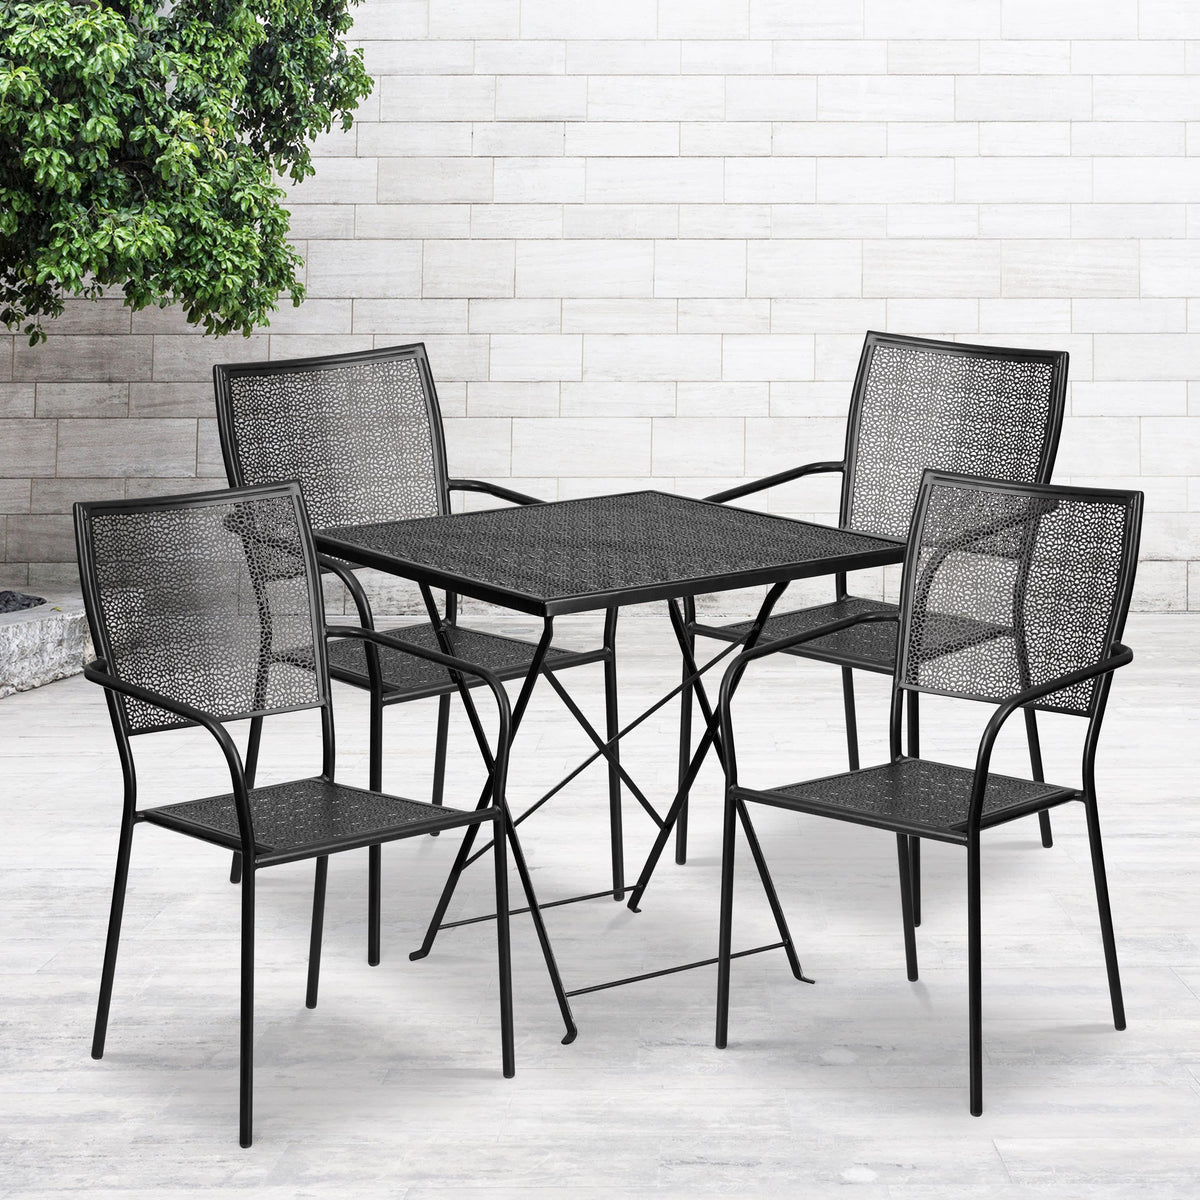 Black |#| 28inch Square Black Indoor-Outdoor Steel Folding Patio Table Set with 4 Chairs